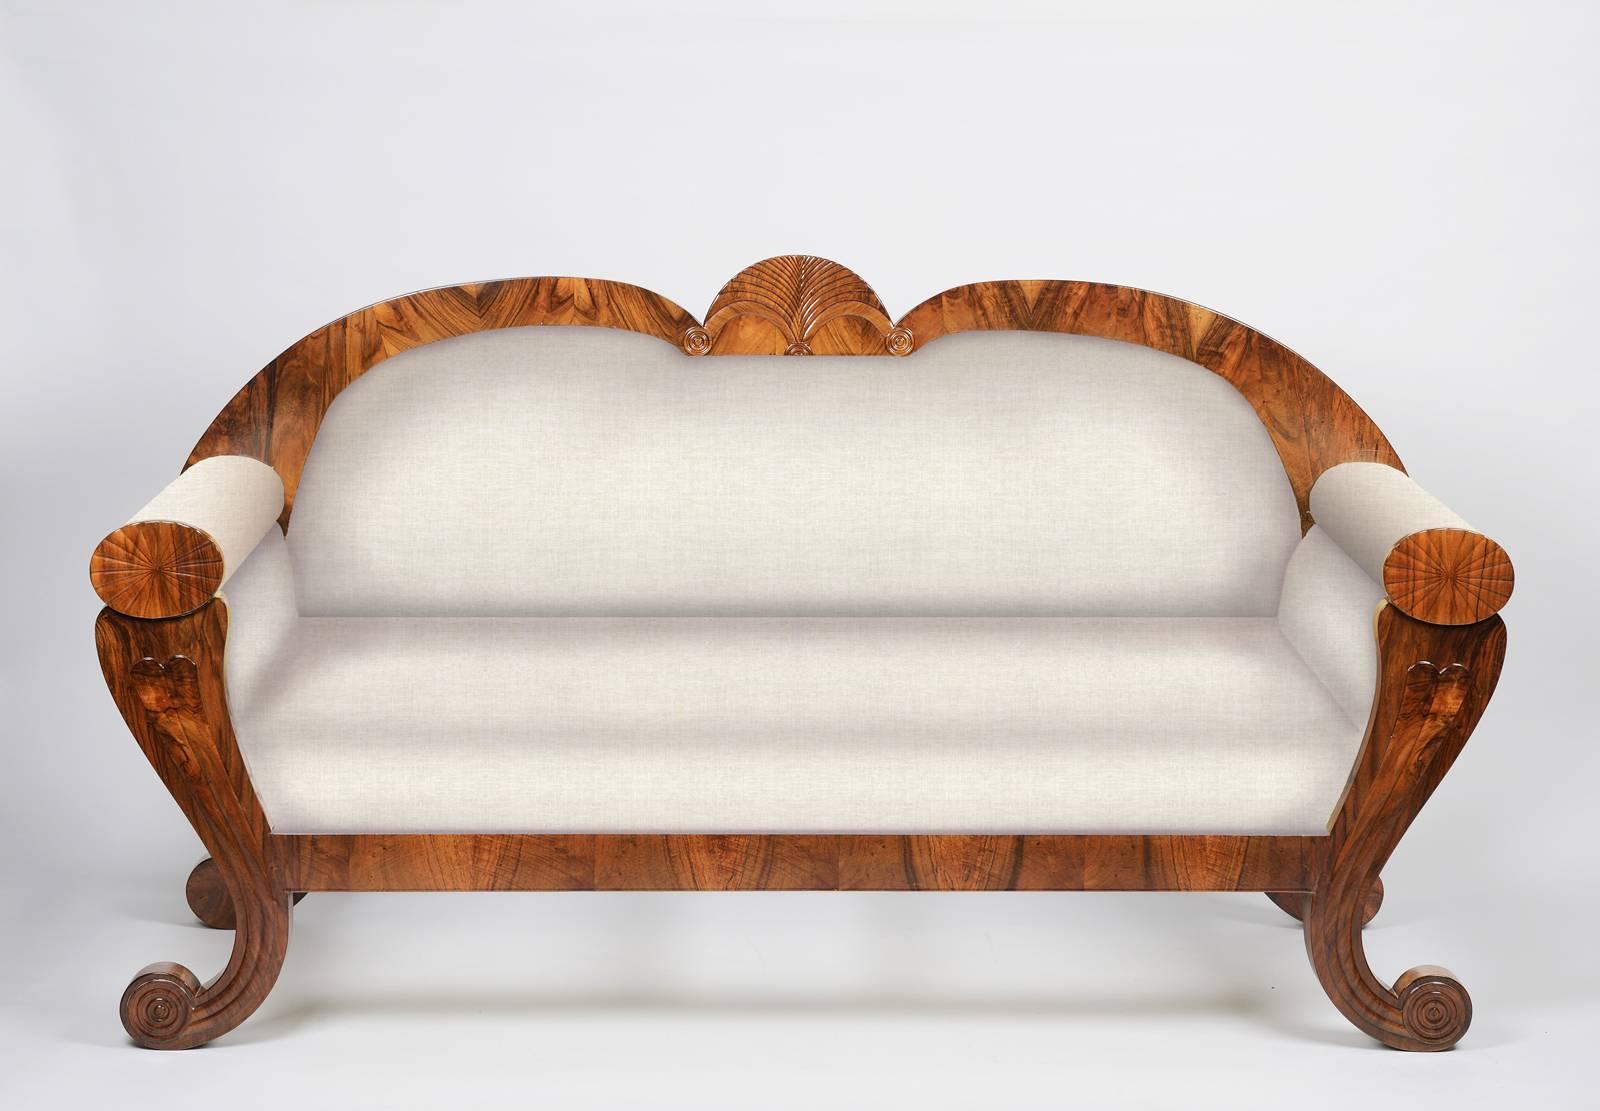 An exceptional neo-Egyptian style Biedermeier sofa in vivid walnut veneer, with elegant scrolled volute legs with carved acanthus and applied walnut detailing,
Vienna, circa 1830.